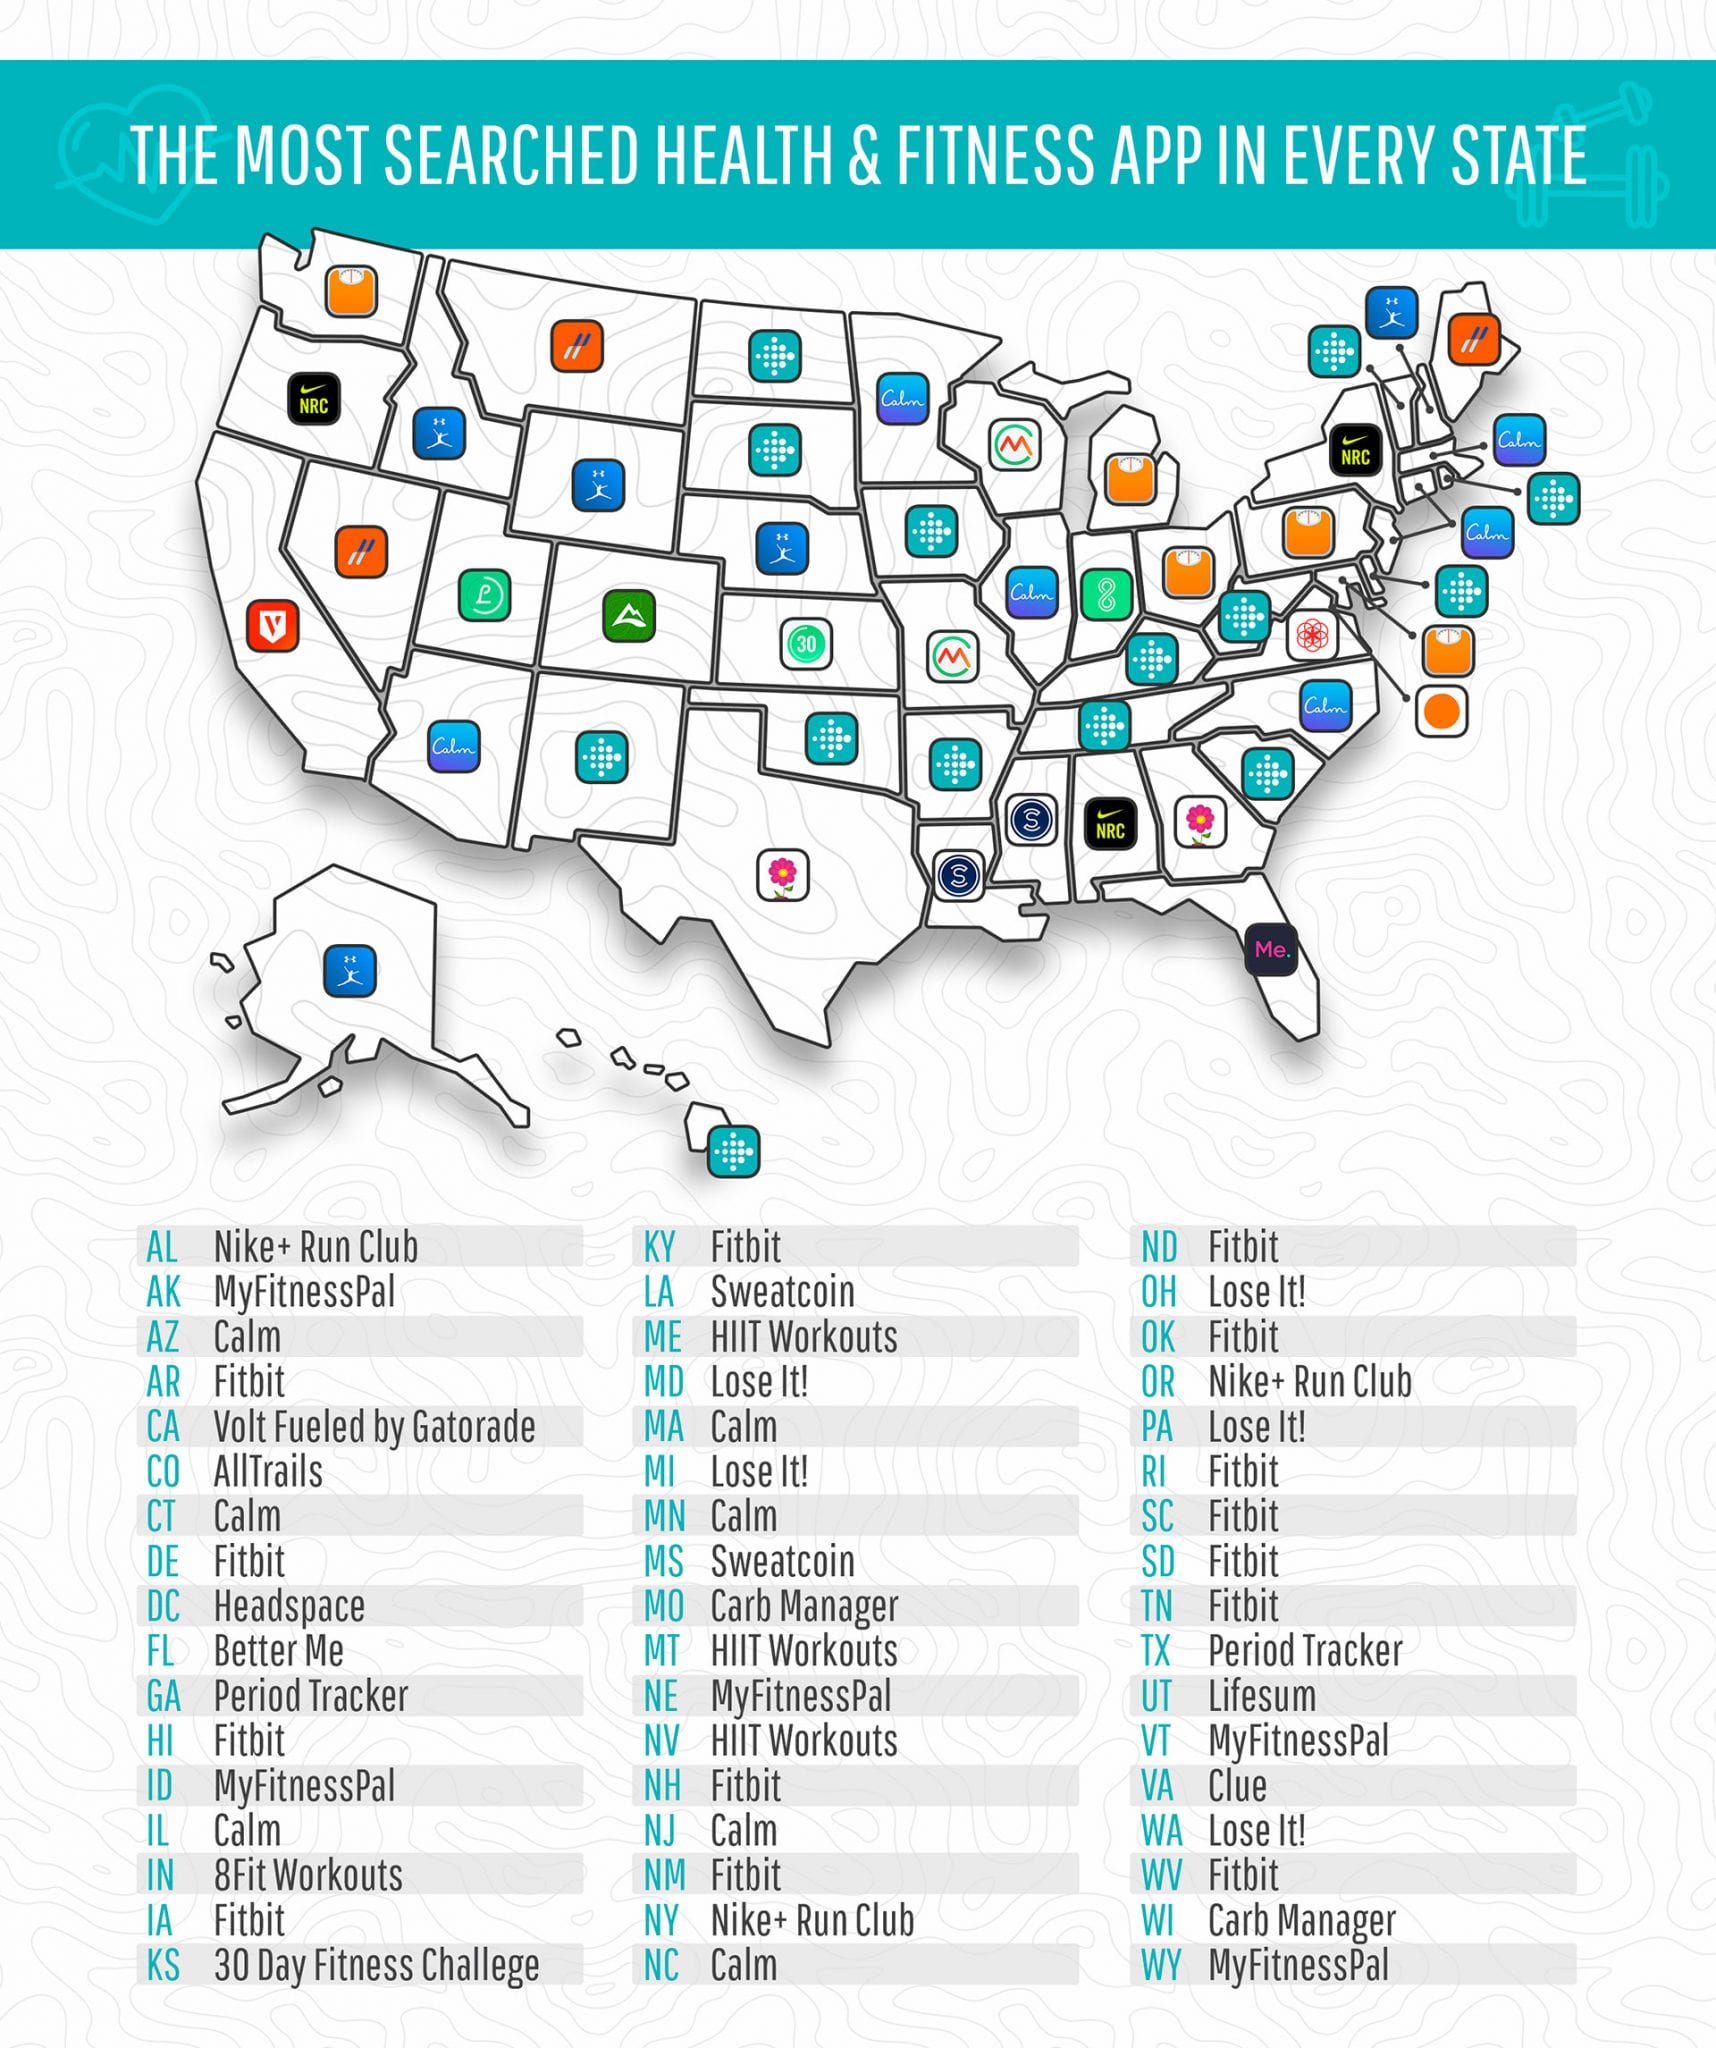 The most searched health & fitness app in every state map